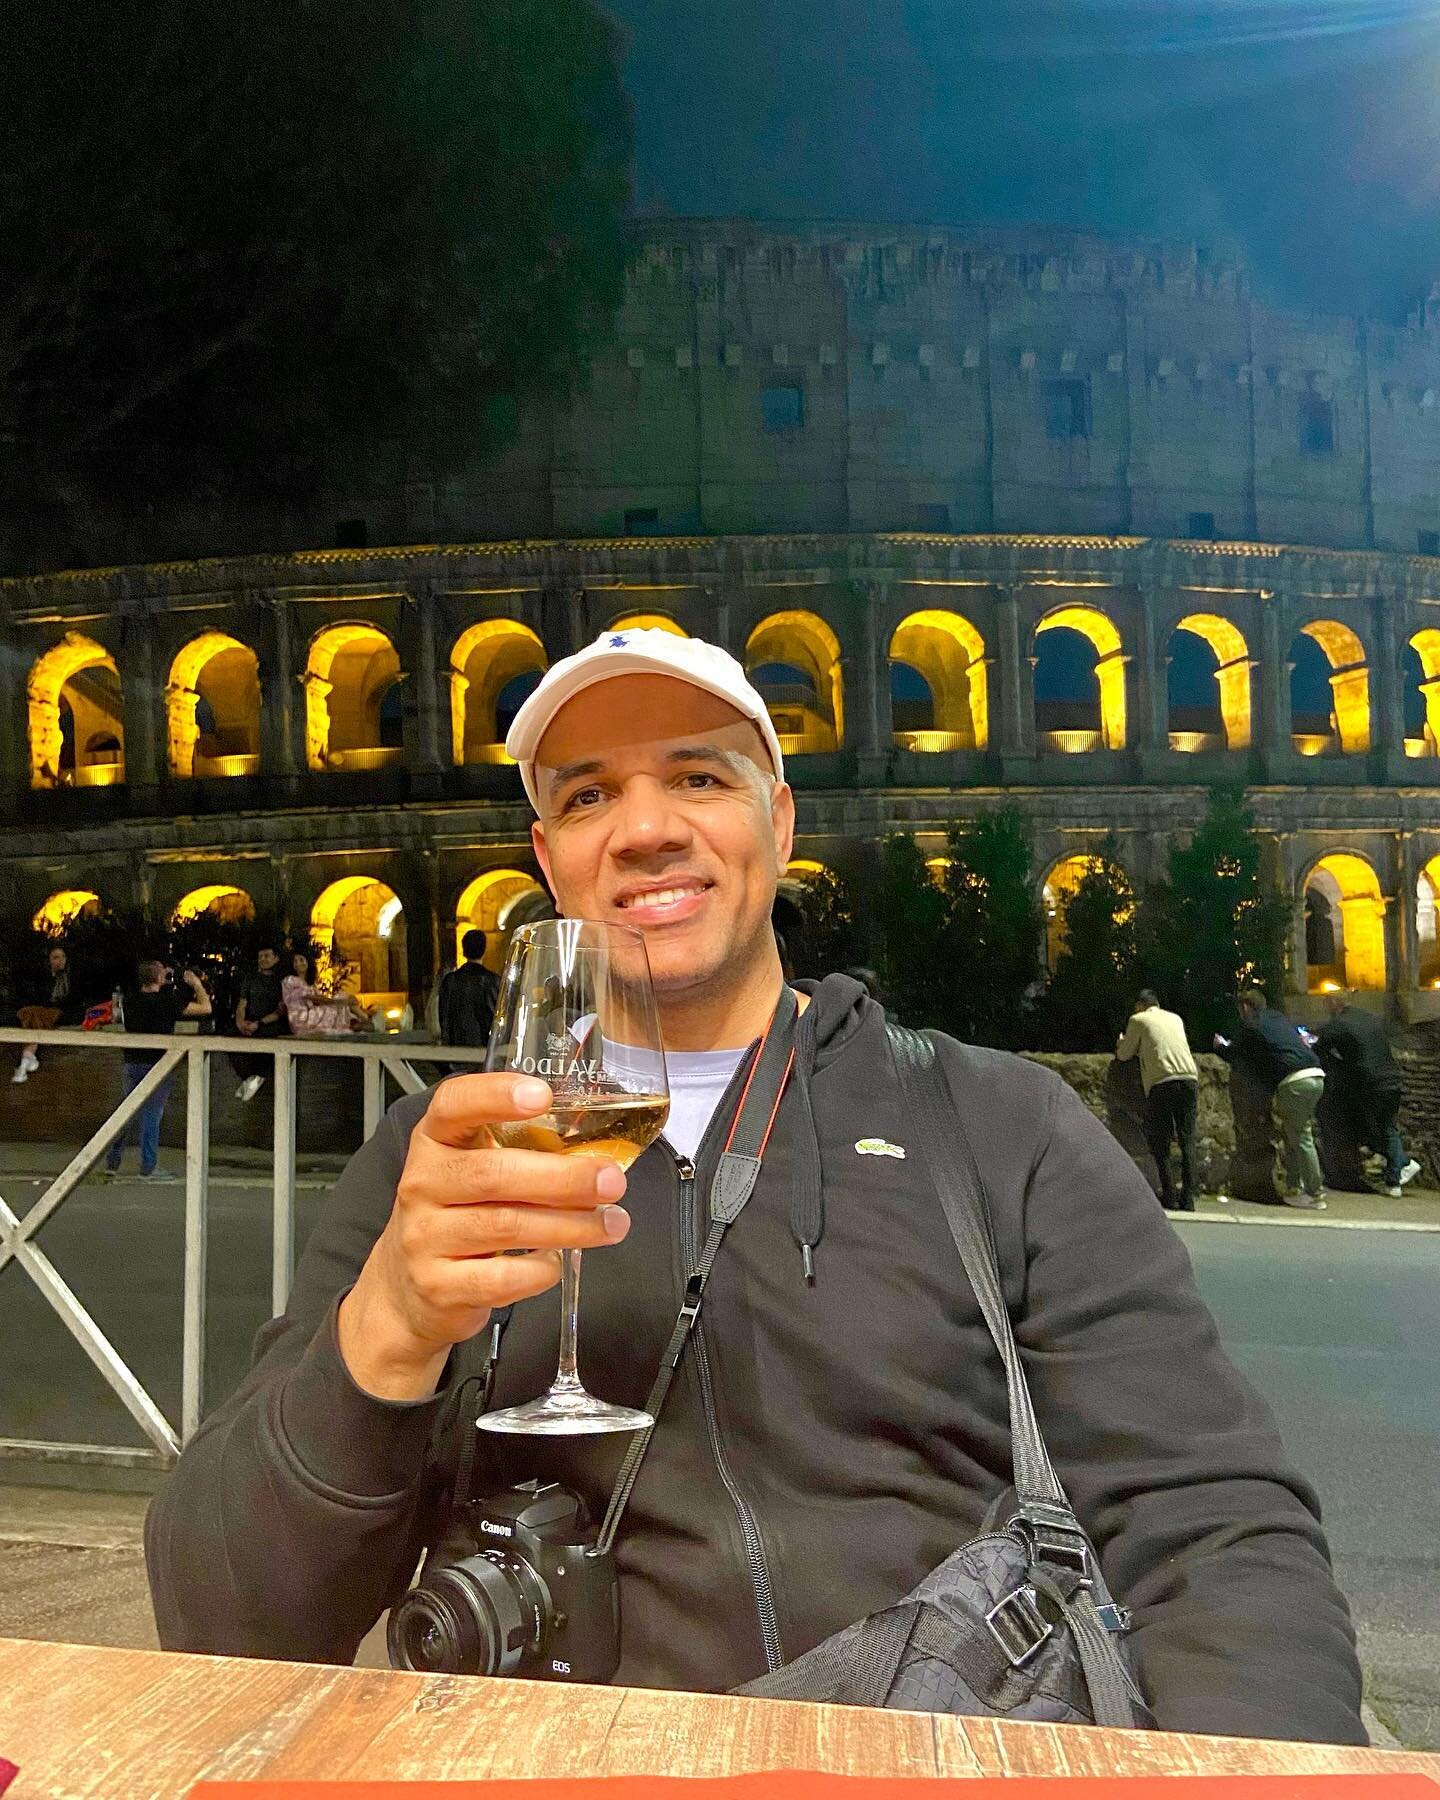 When in Rome, have a glass of wine in front of the Colosseum 
&bull;
&bull;
#rome #colosseum #italy #travel